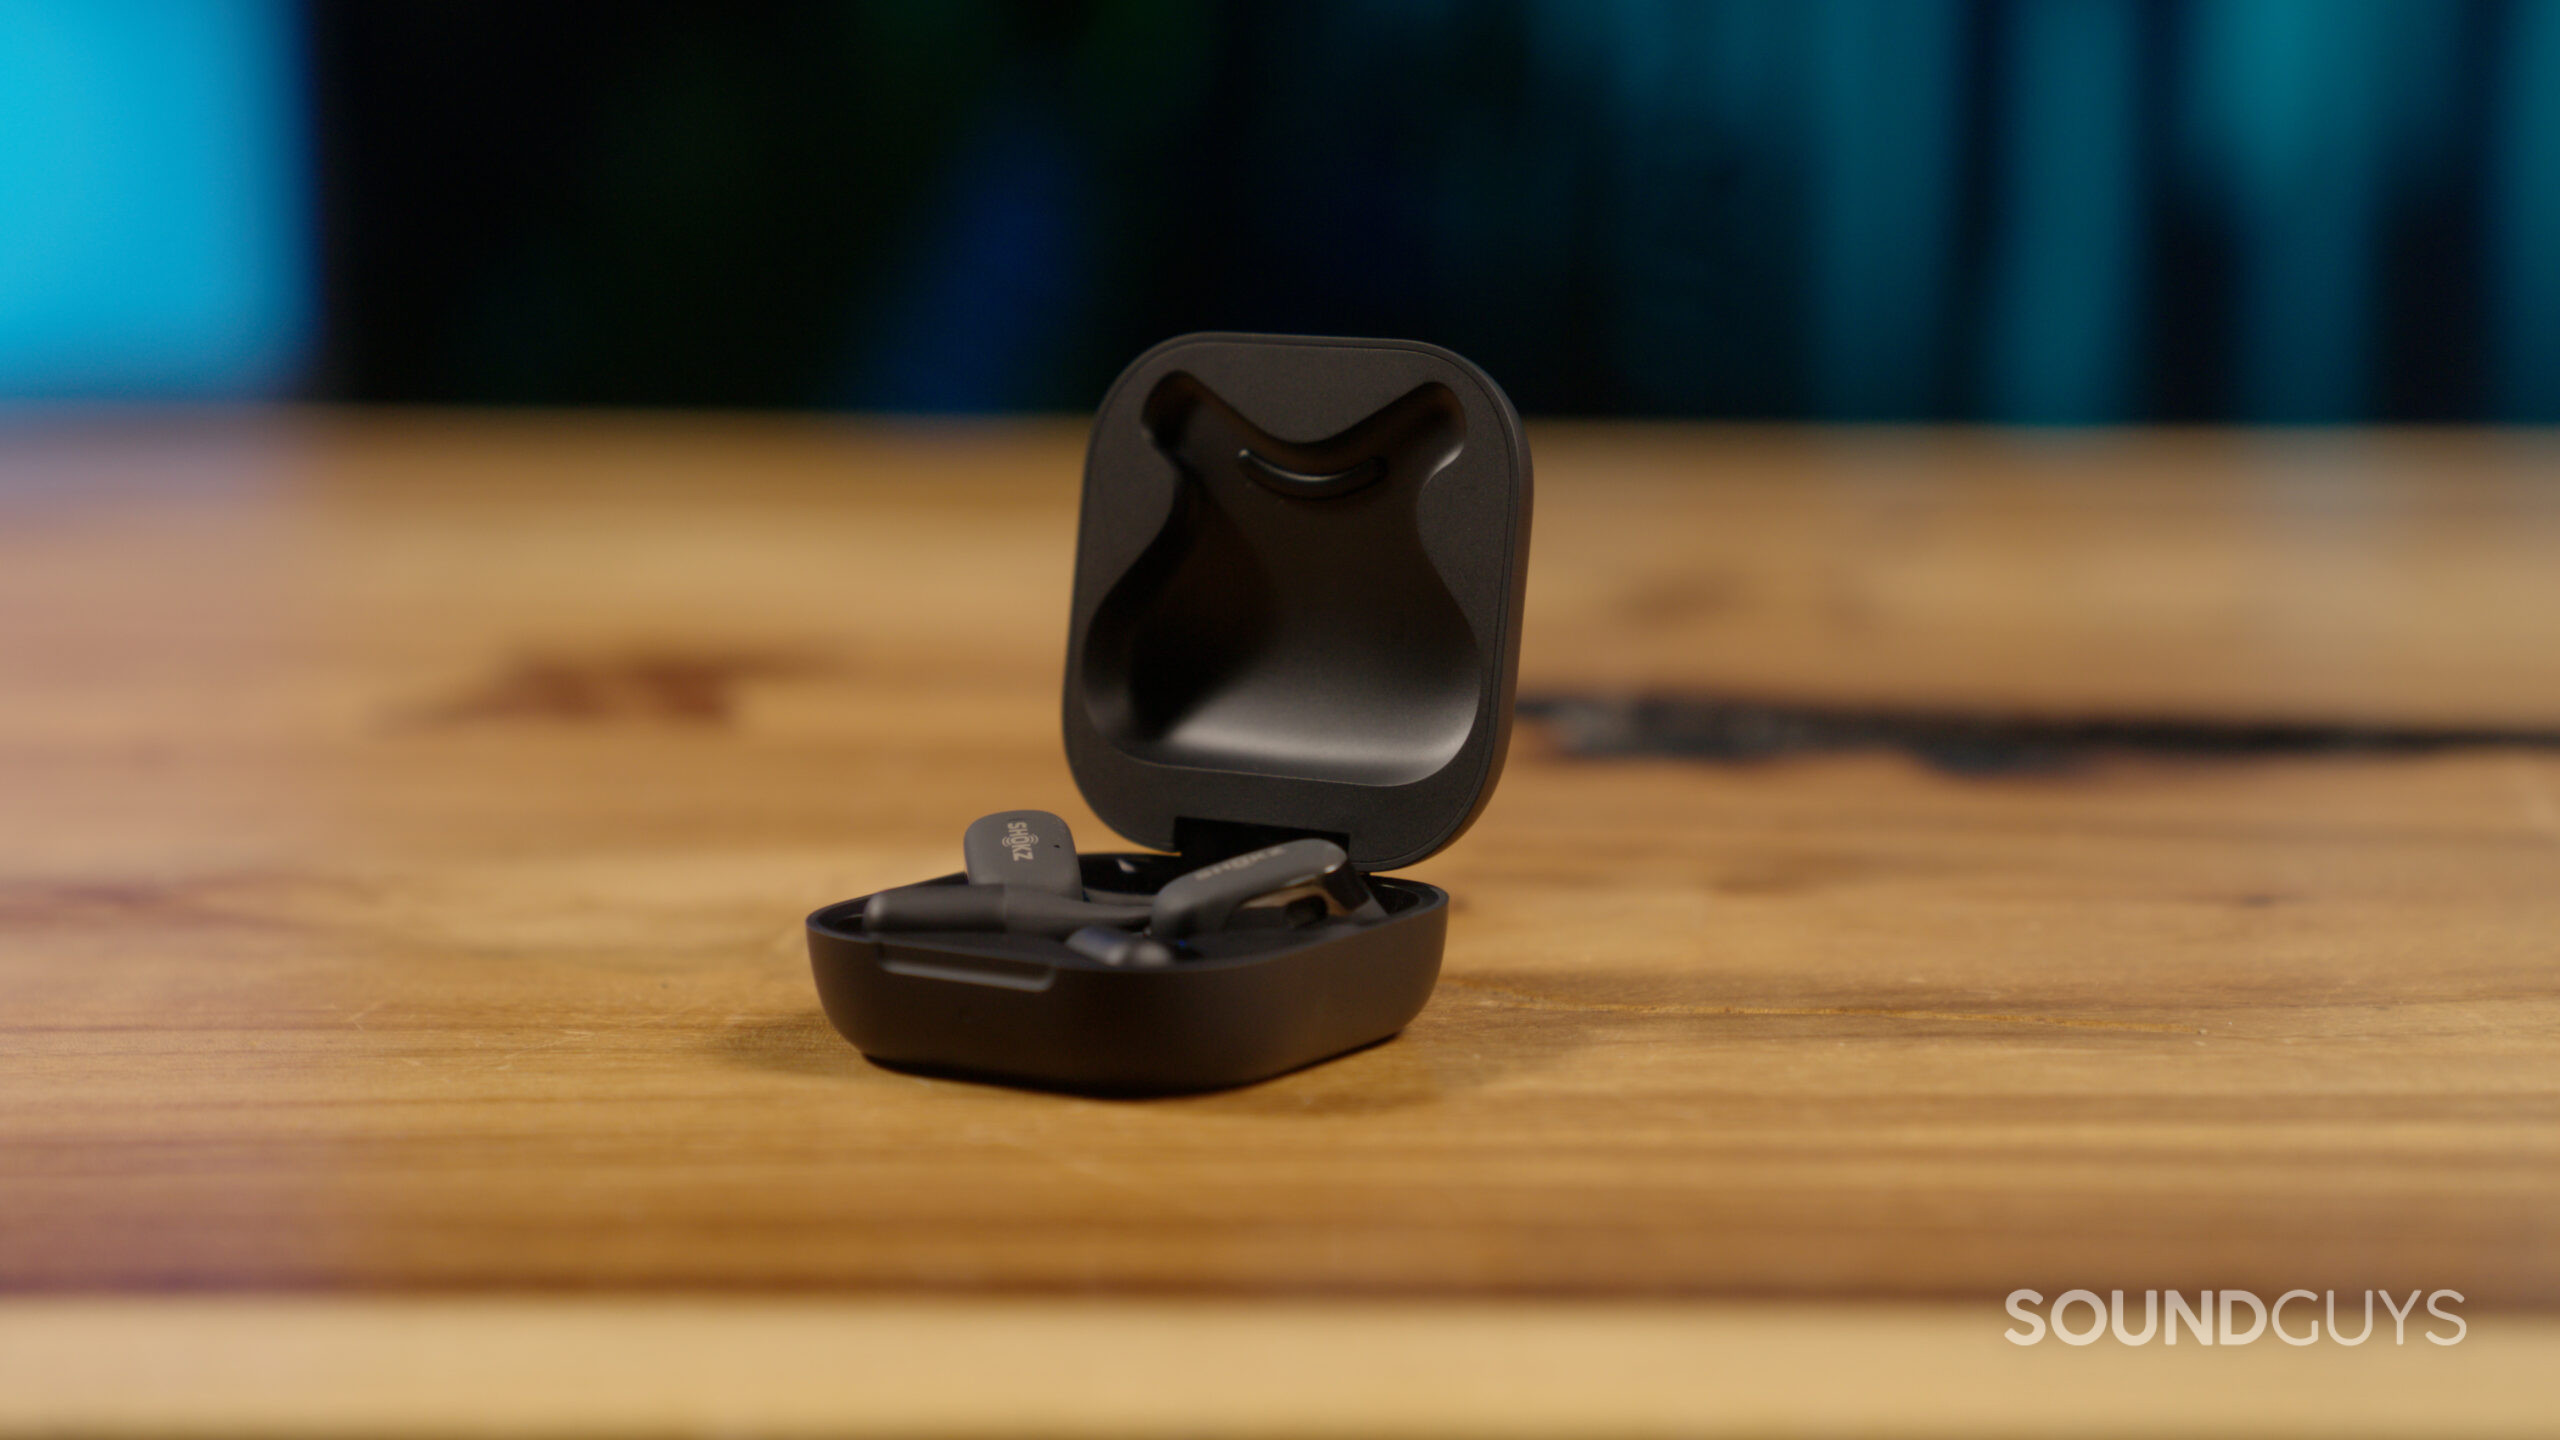 On a wood surface the Shokz OpenFit rests with the lid open.